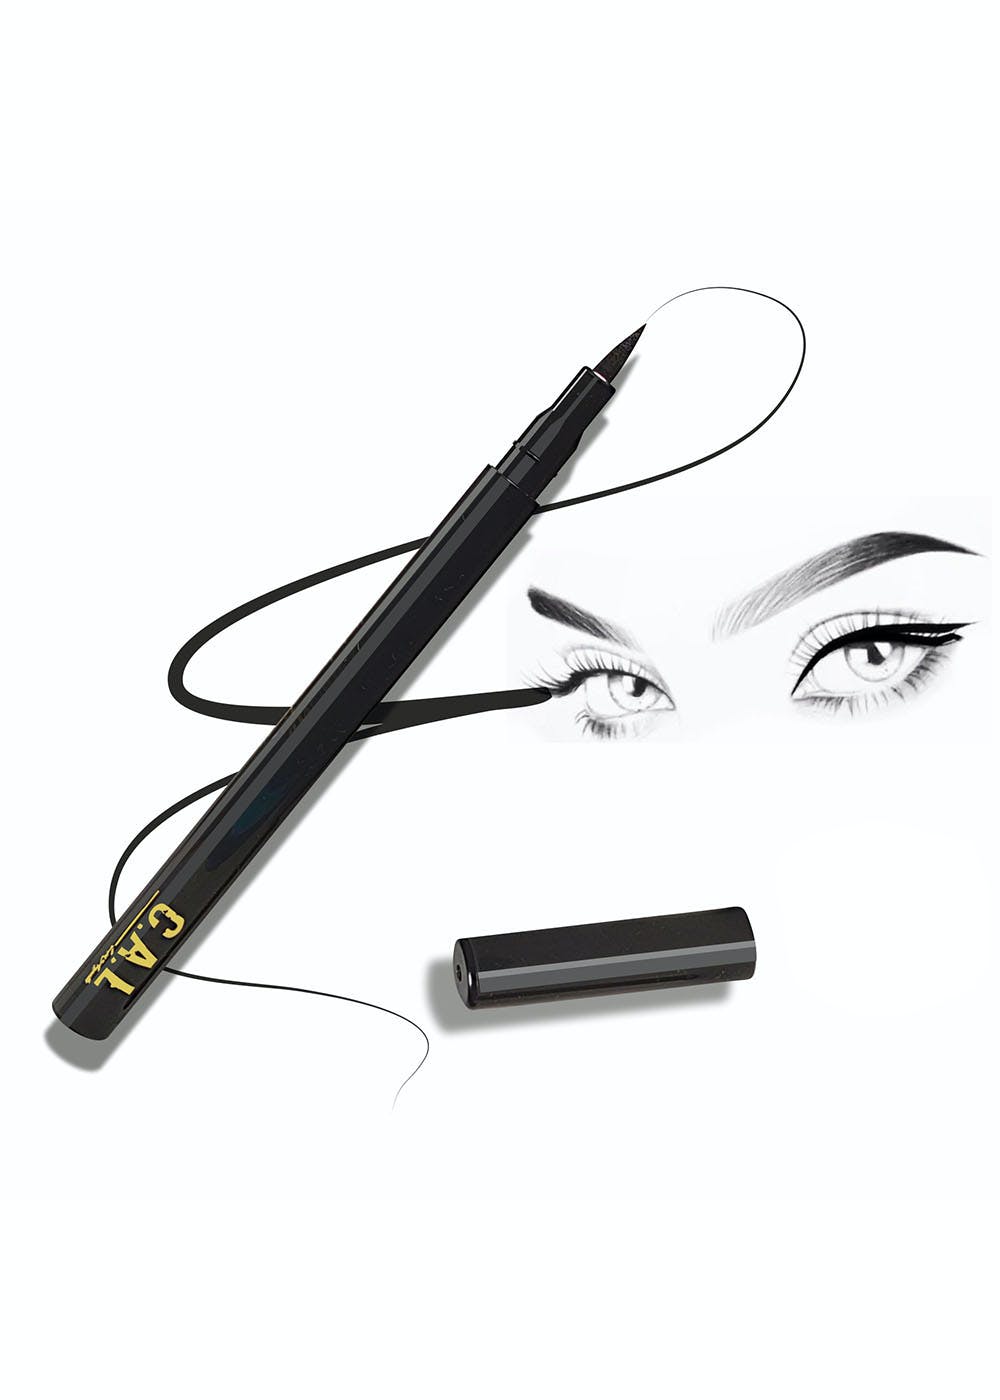 Buy Cosmac Waterproof Sketch Eyeliner in black & White Kajal for protective  stay all day (Set of 2) Online at Low Prices in India - Amazon.in